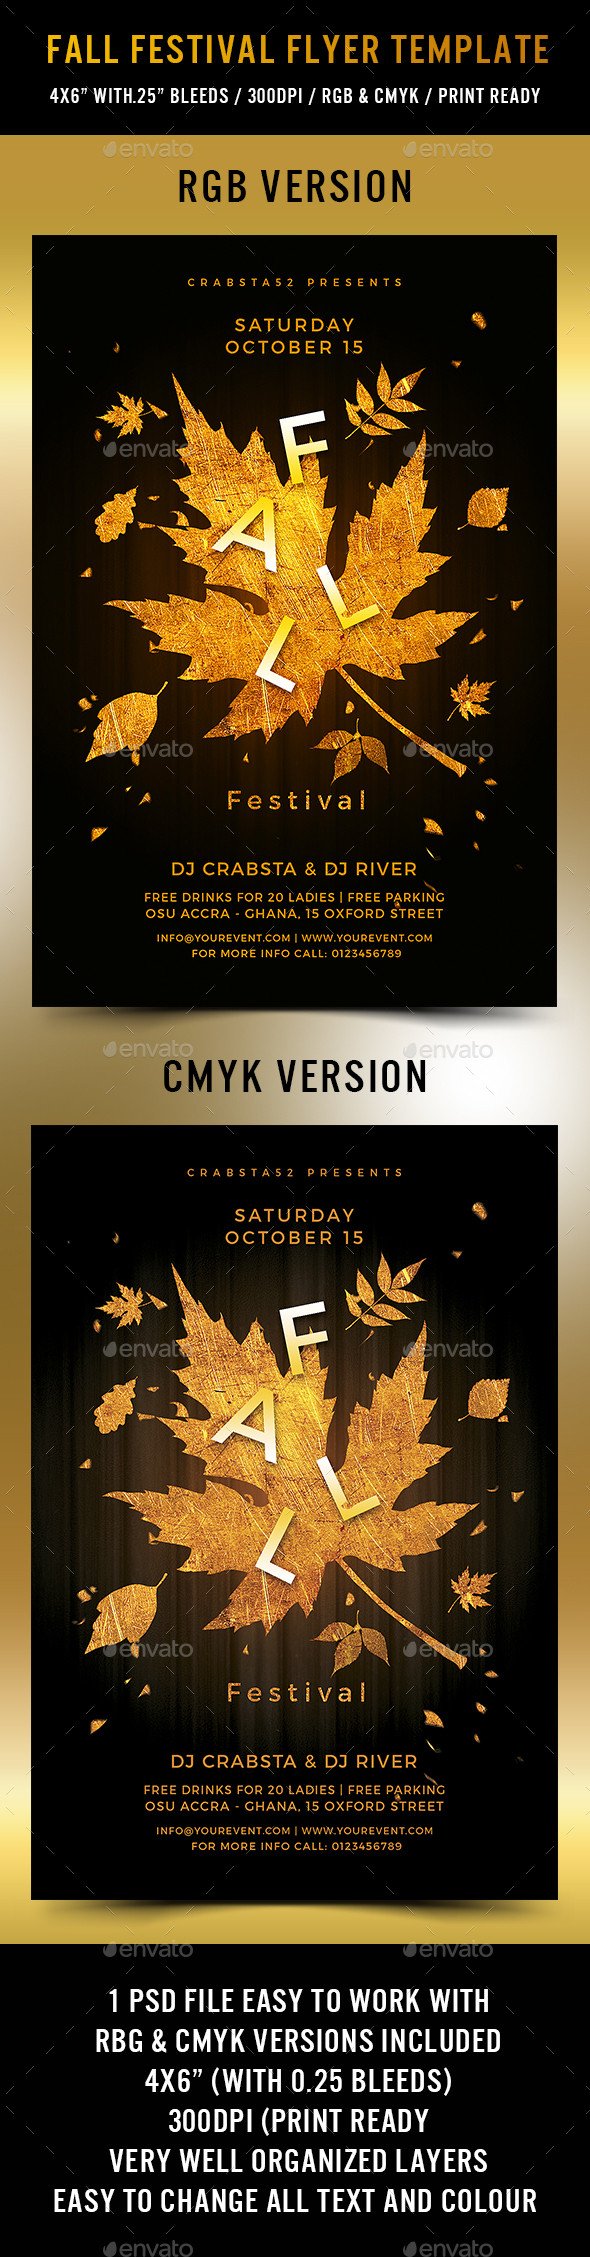 Fall Festival Flyer Template by Crabsta52